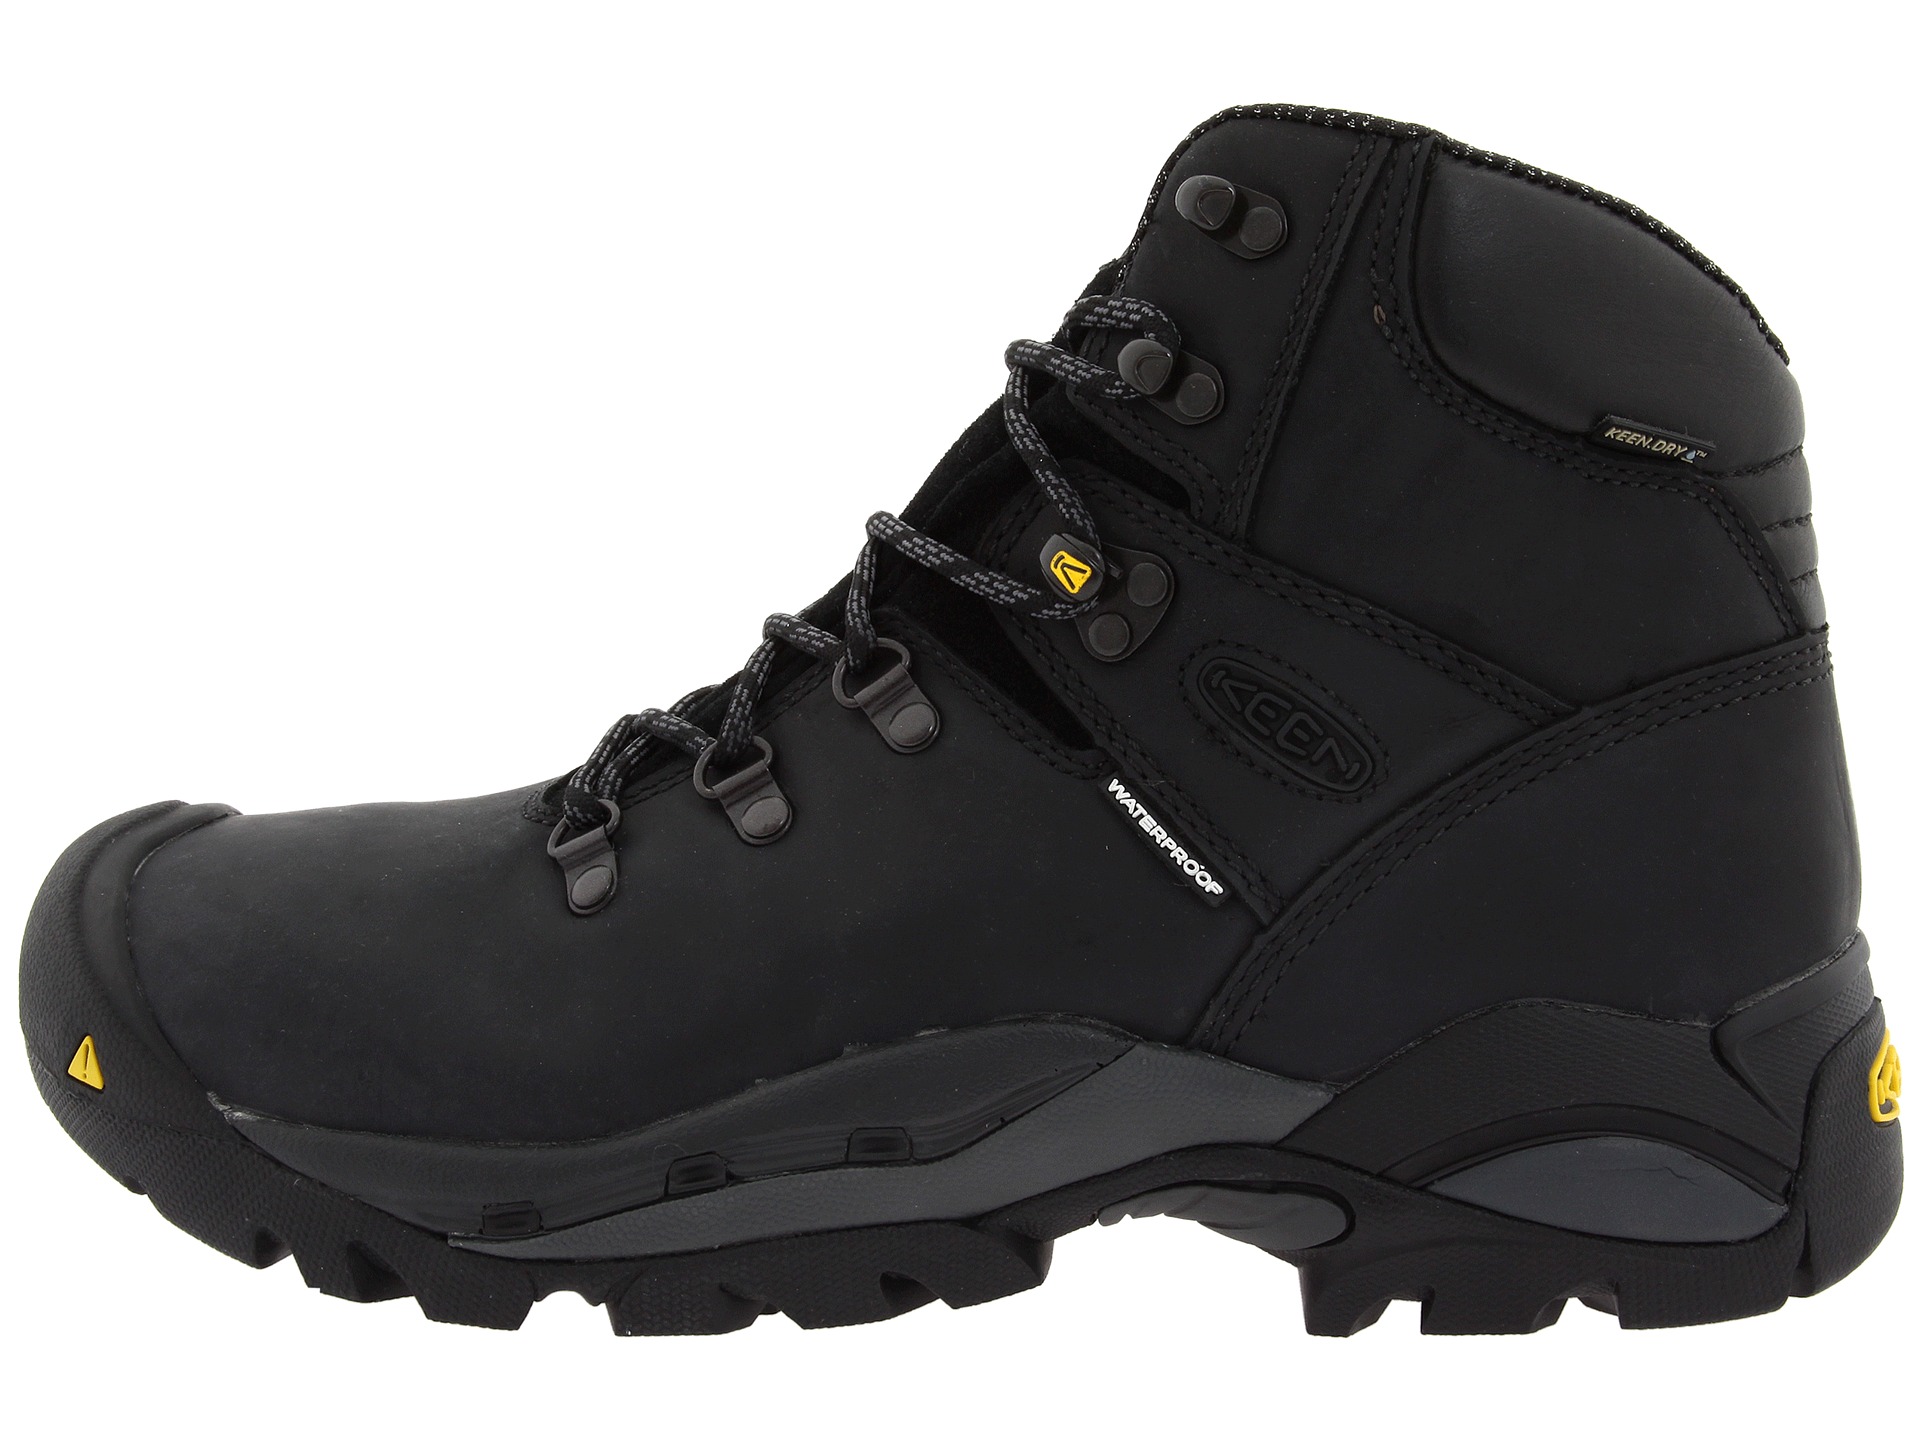 Keen Utility Cleveland Boot Black | Shipped Free at Zappos